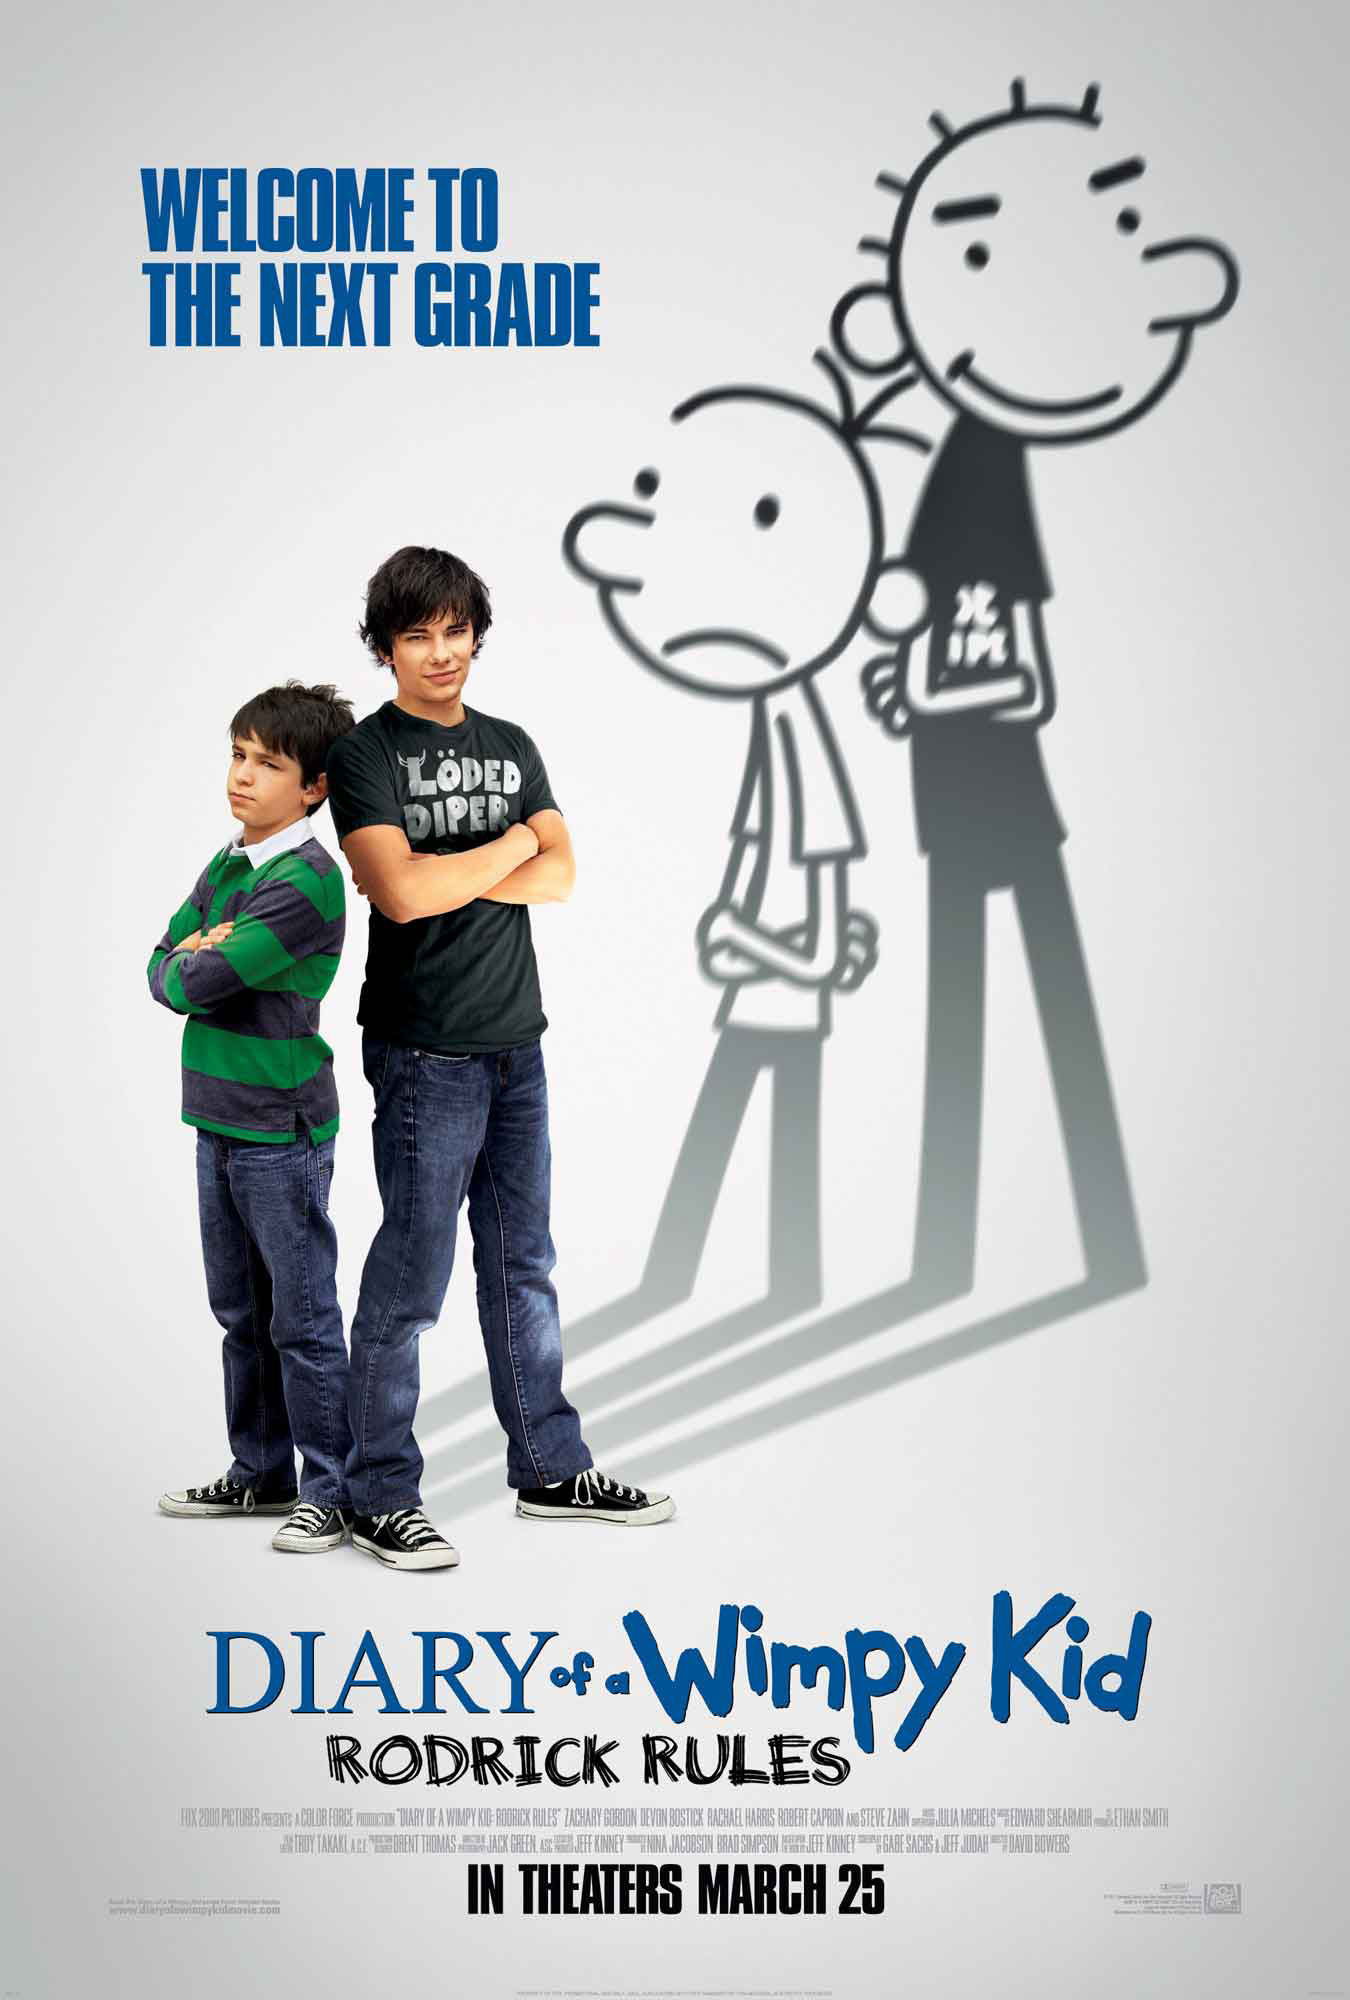 Diary of a Wimpy Kid One Sheet